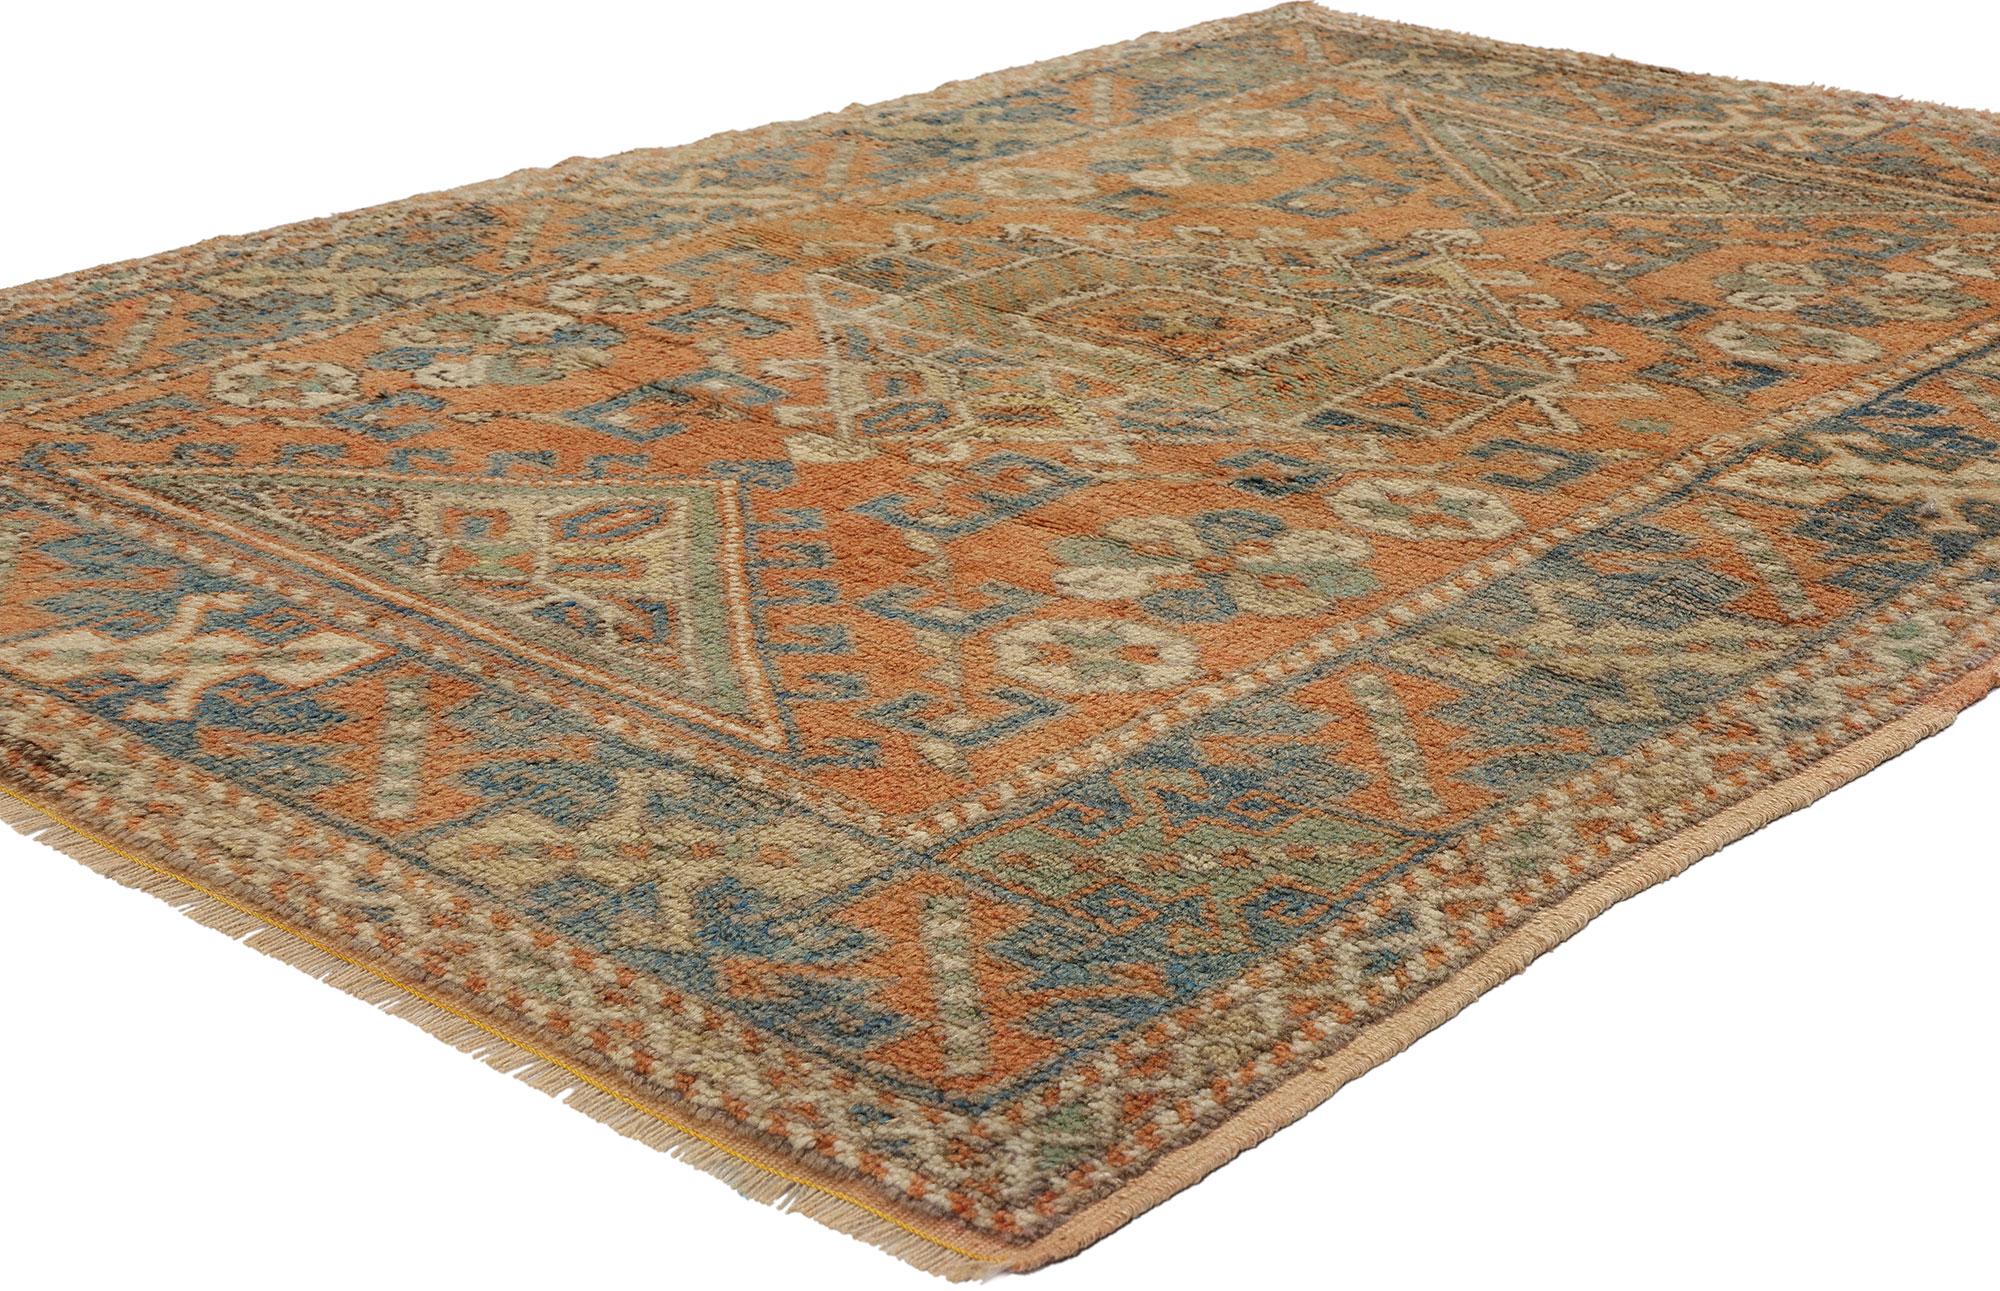 53899 Vintage Orange Turkish Oushak Rug, 04'00 x 05'08. Bringing together Bohemian flair and nomadic allure, this hand-knotted wool Turkish Oushak rug enchants with its vibrant orange hues and intricate tribal design. At its core lies a captivating